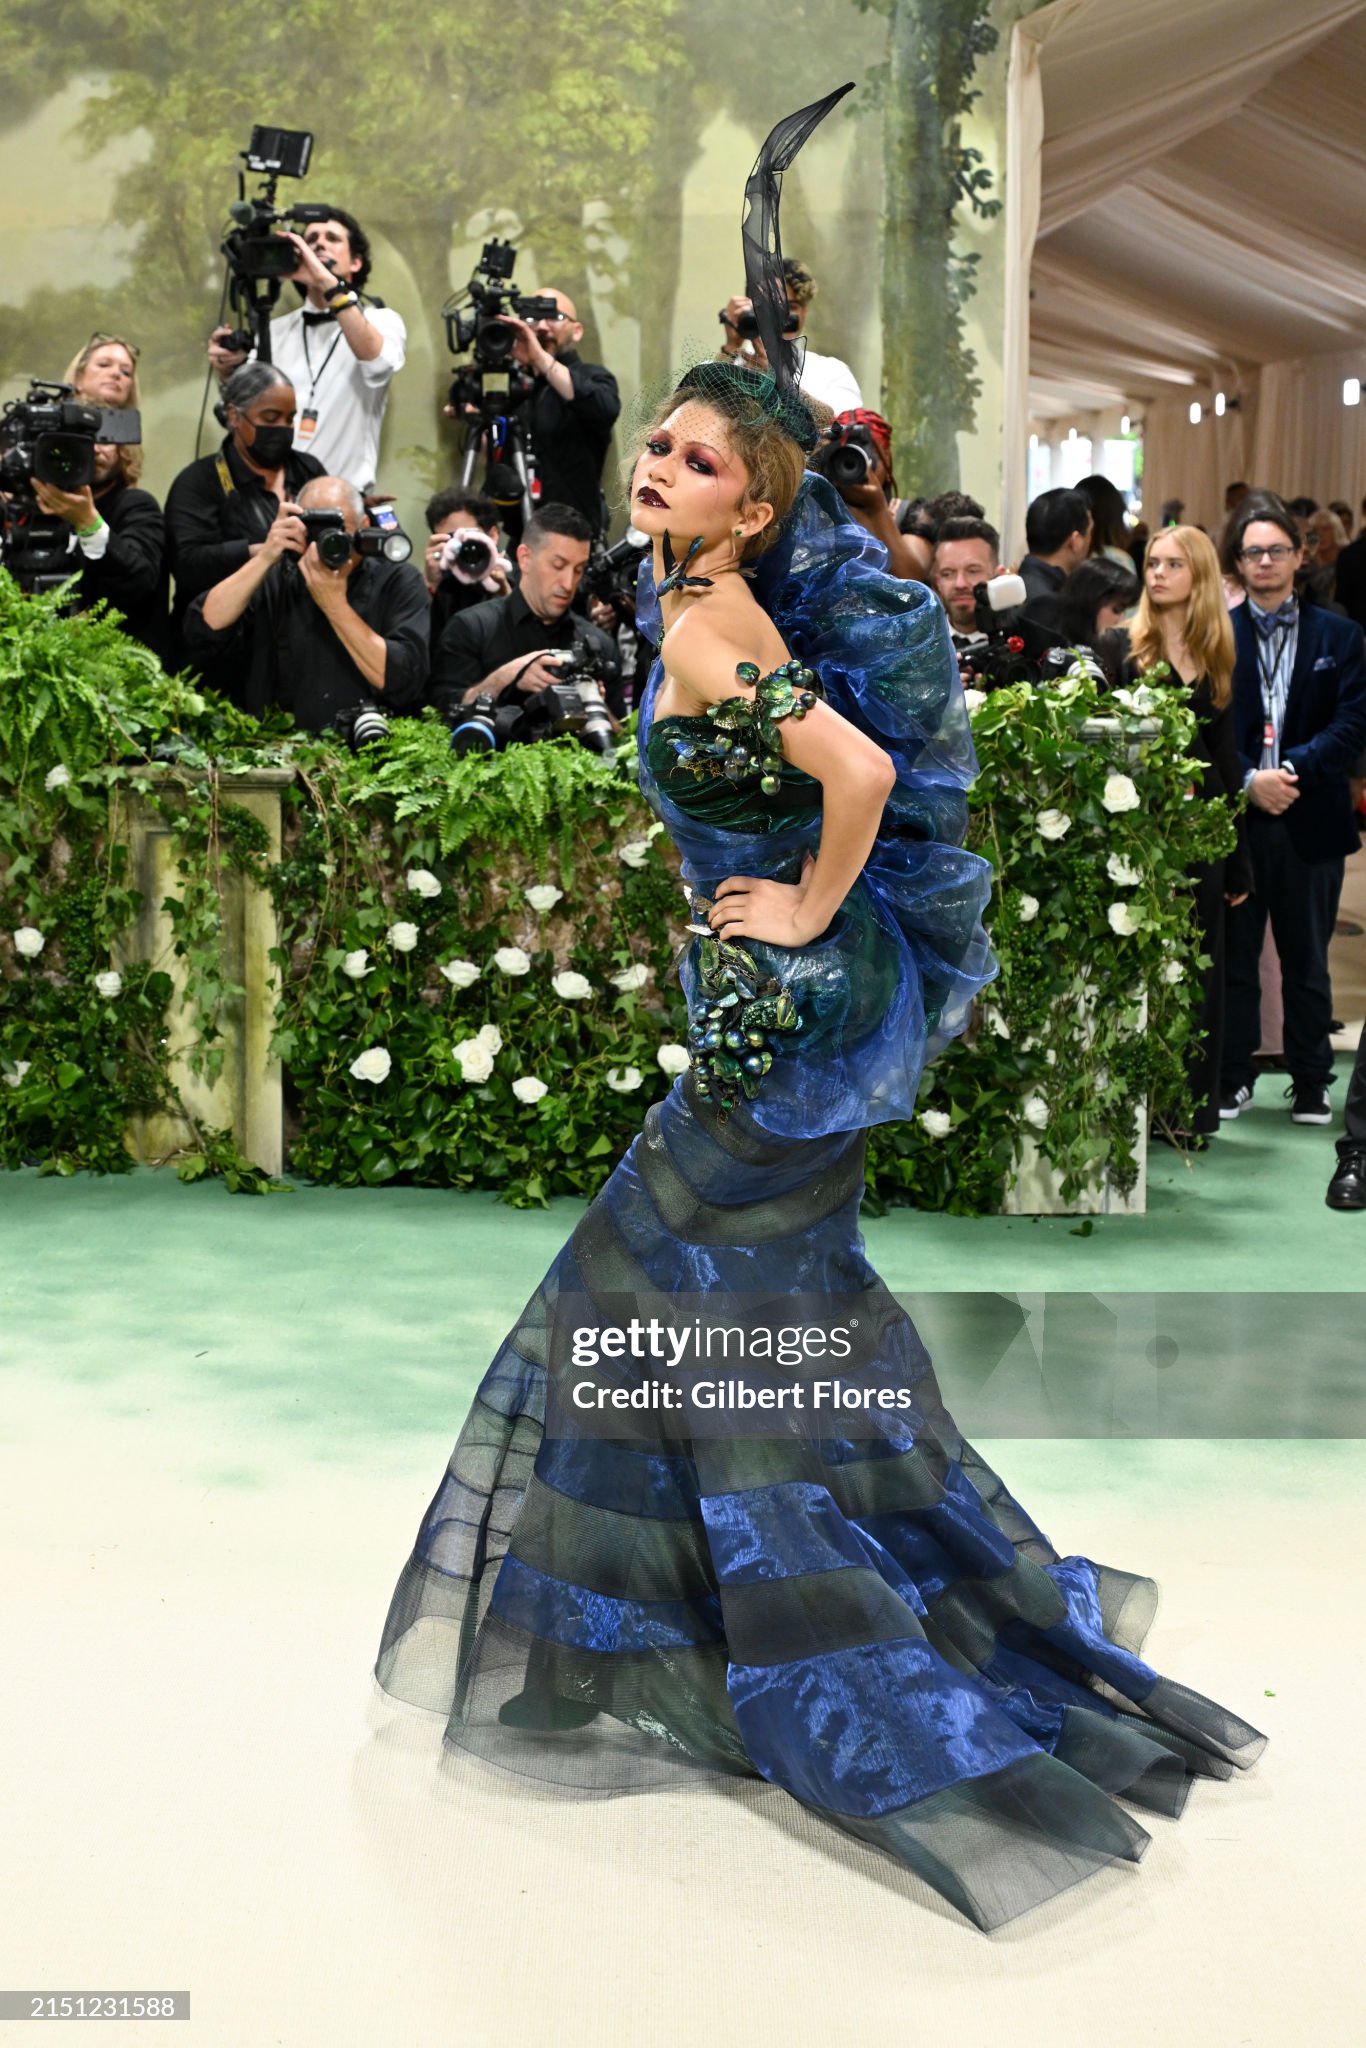 gettyimages-2151231588-2048x2048.jpg